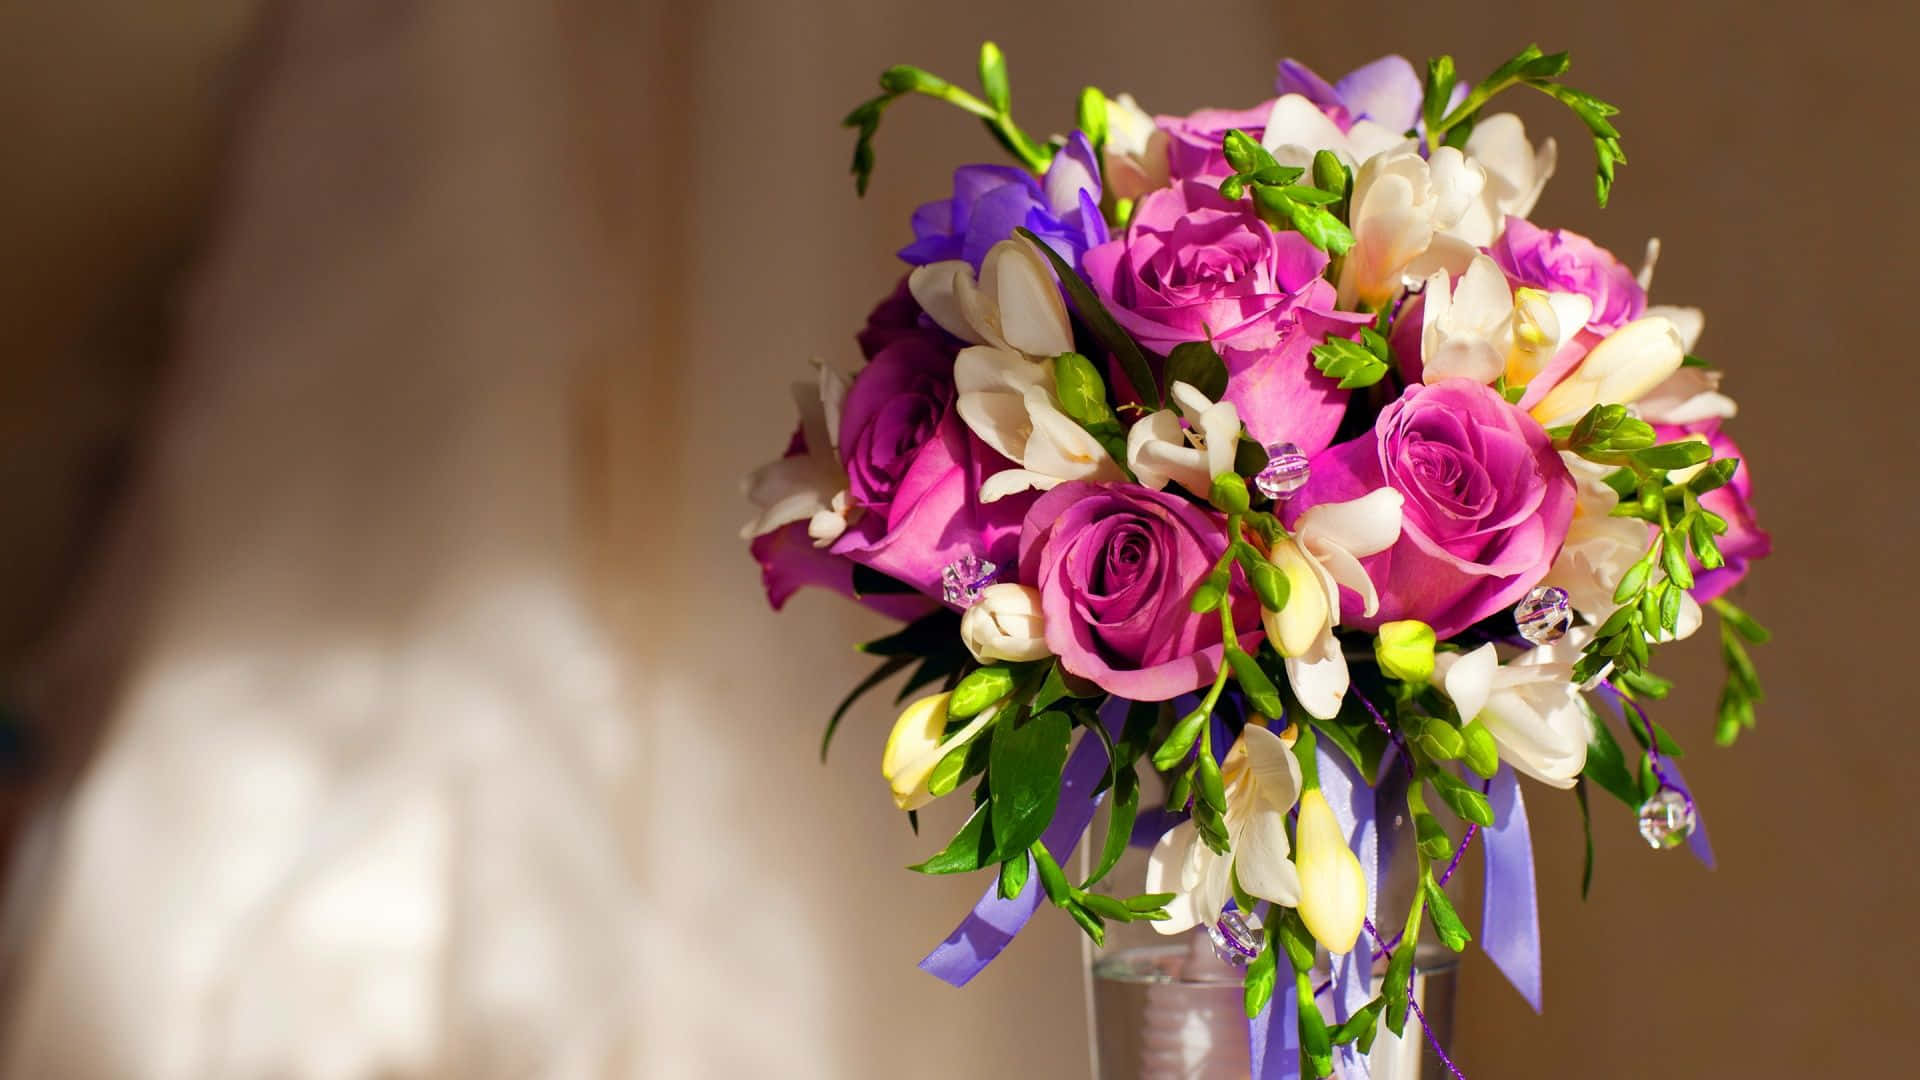 Colorful flower arrangement to brighten any room Wallpaper